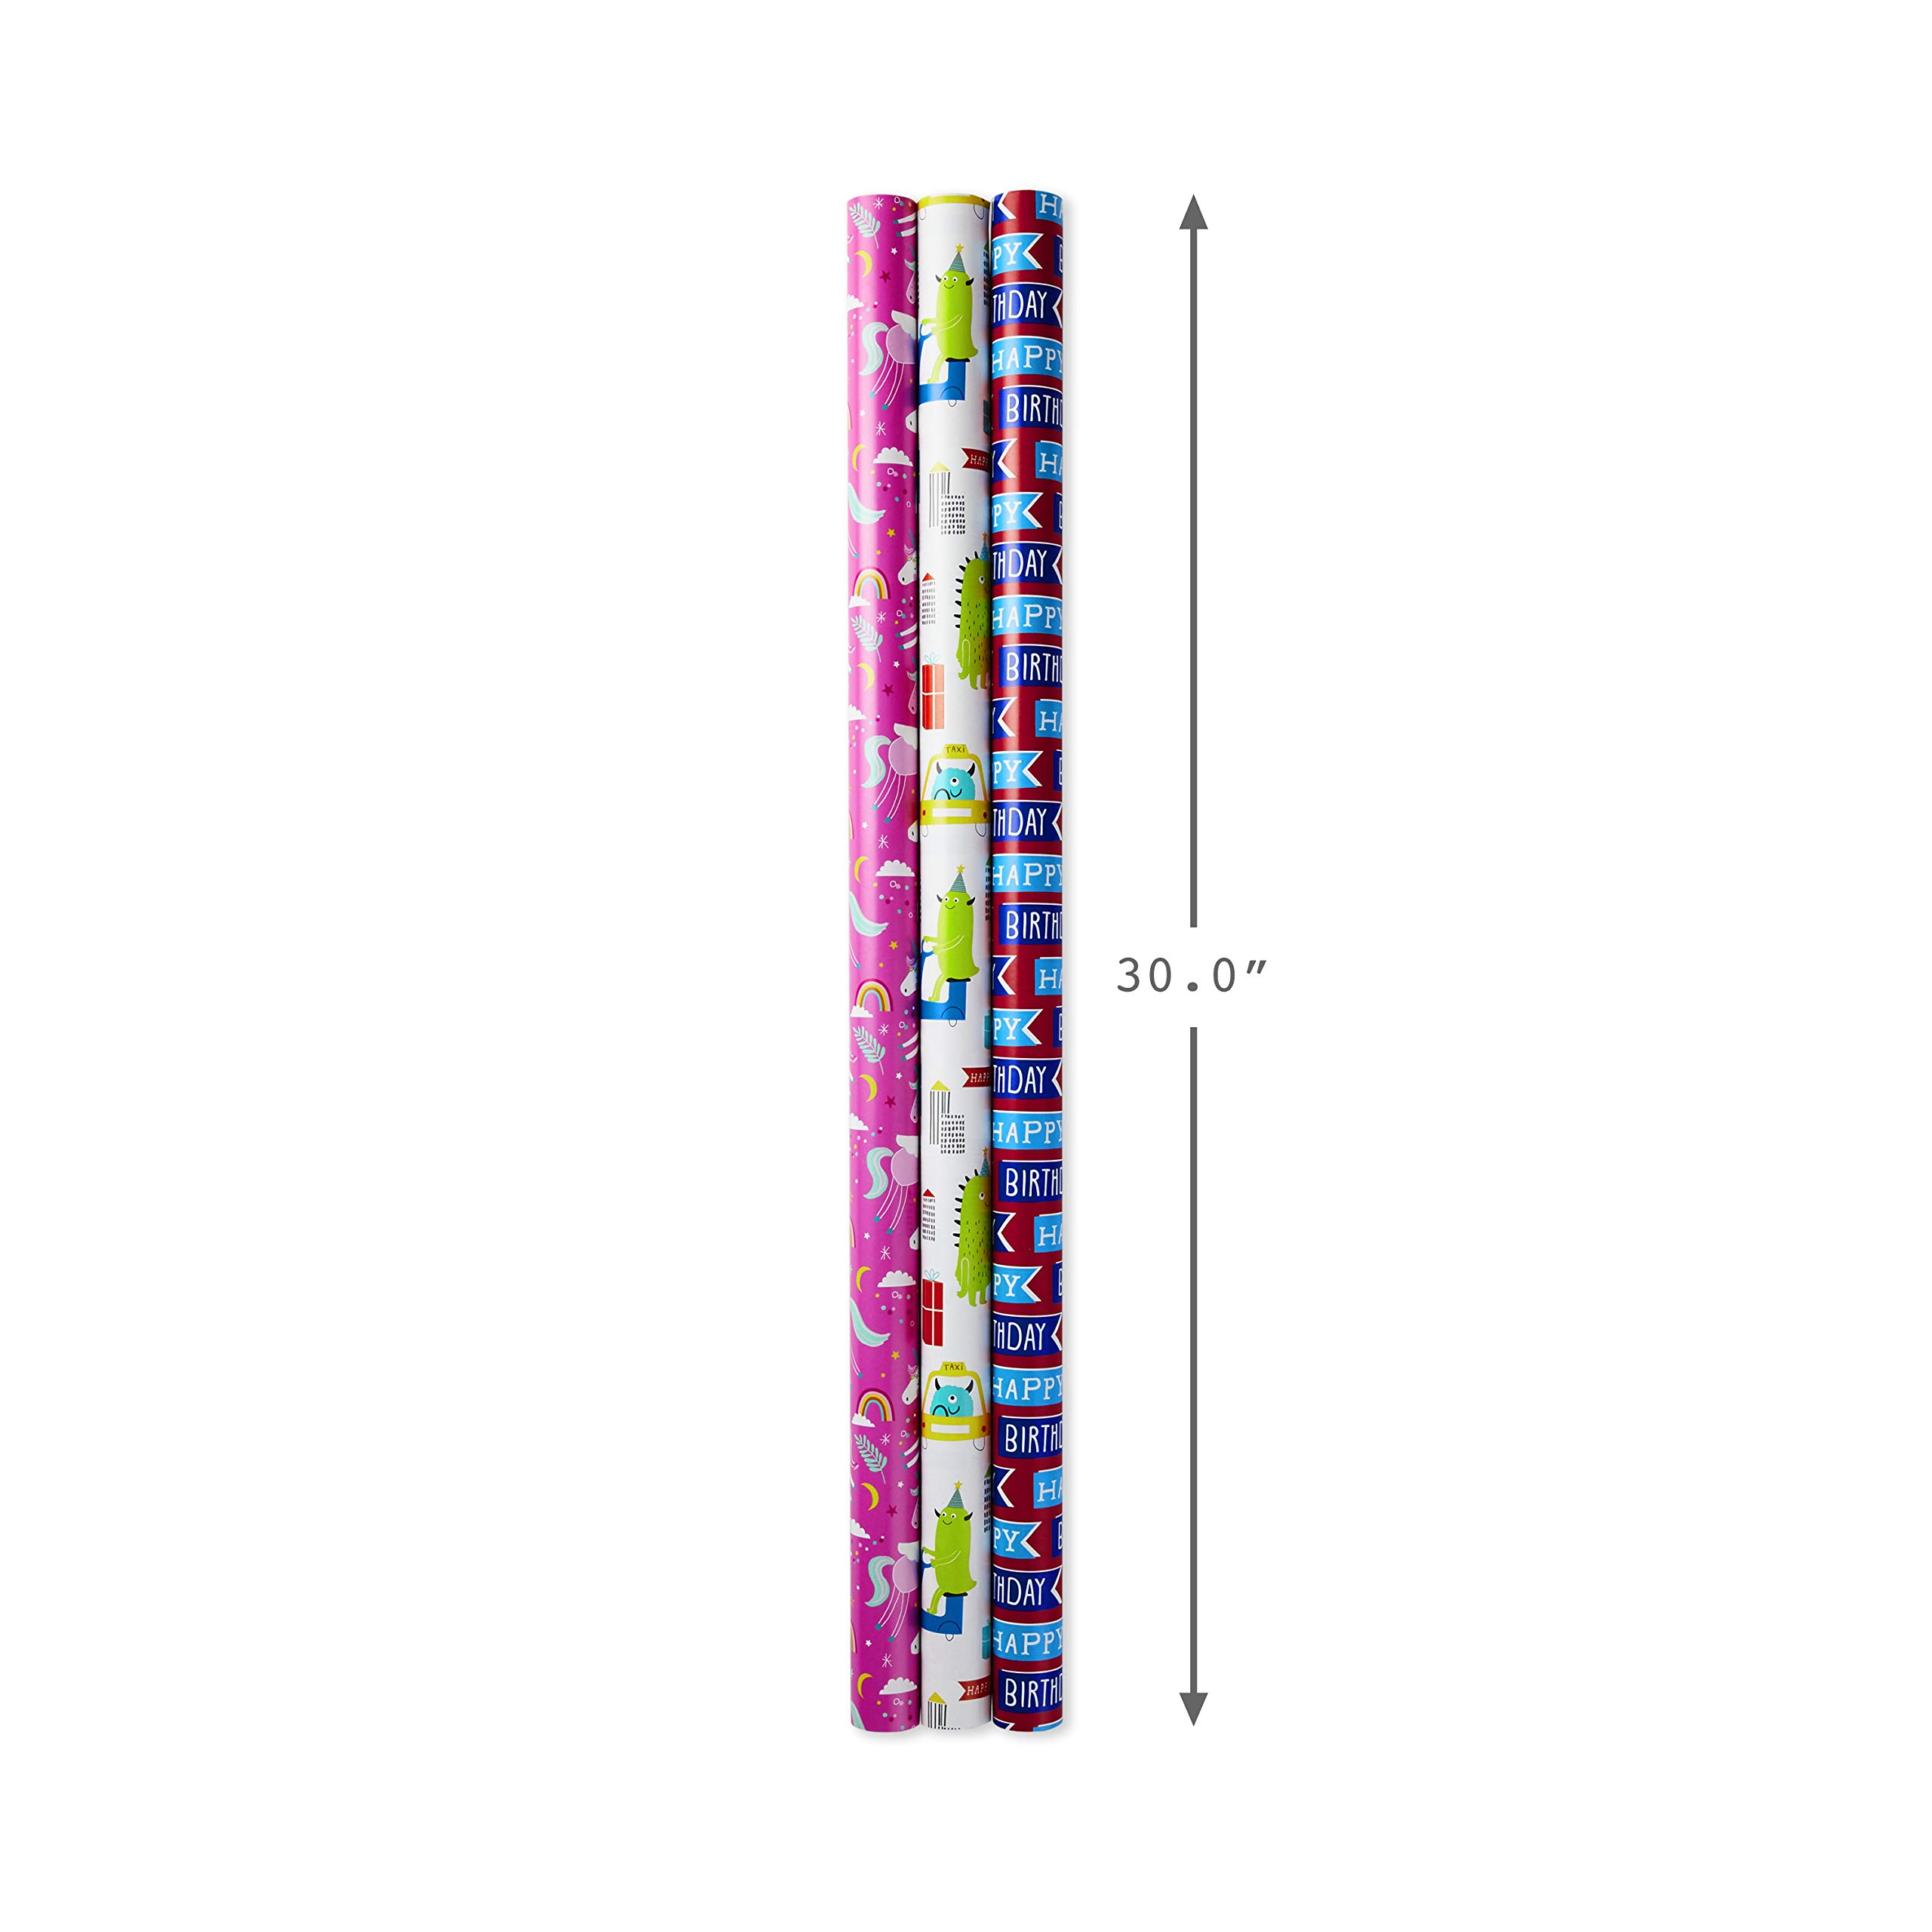 Hallmark Reversible Kids Birthday Wrapping Paper (3 Rolls: 120 sq. ft. ttl.) Monsters and Unicorns, Polka Dots, Chevron, Pink, Teal, Blue, Red, Orange, Lime Green